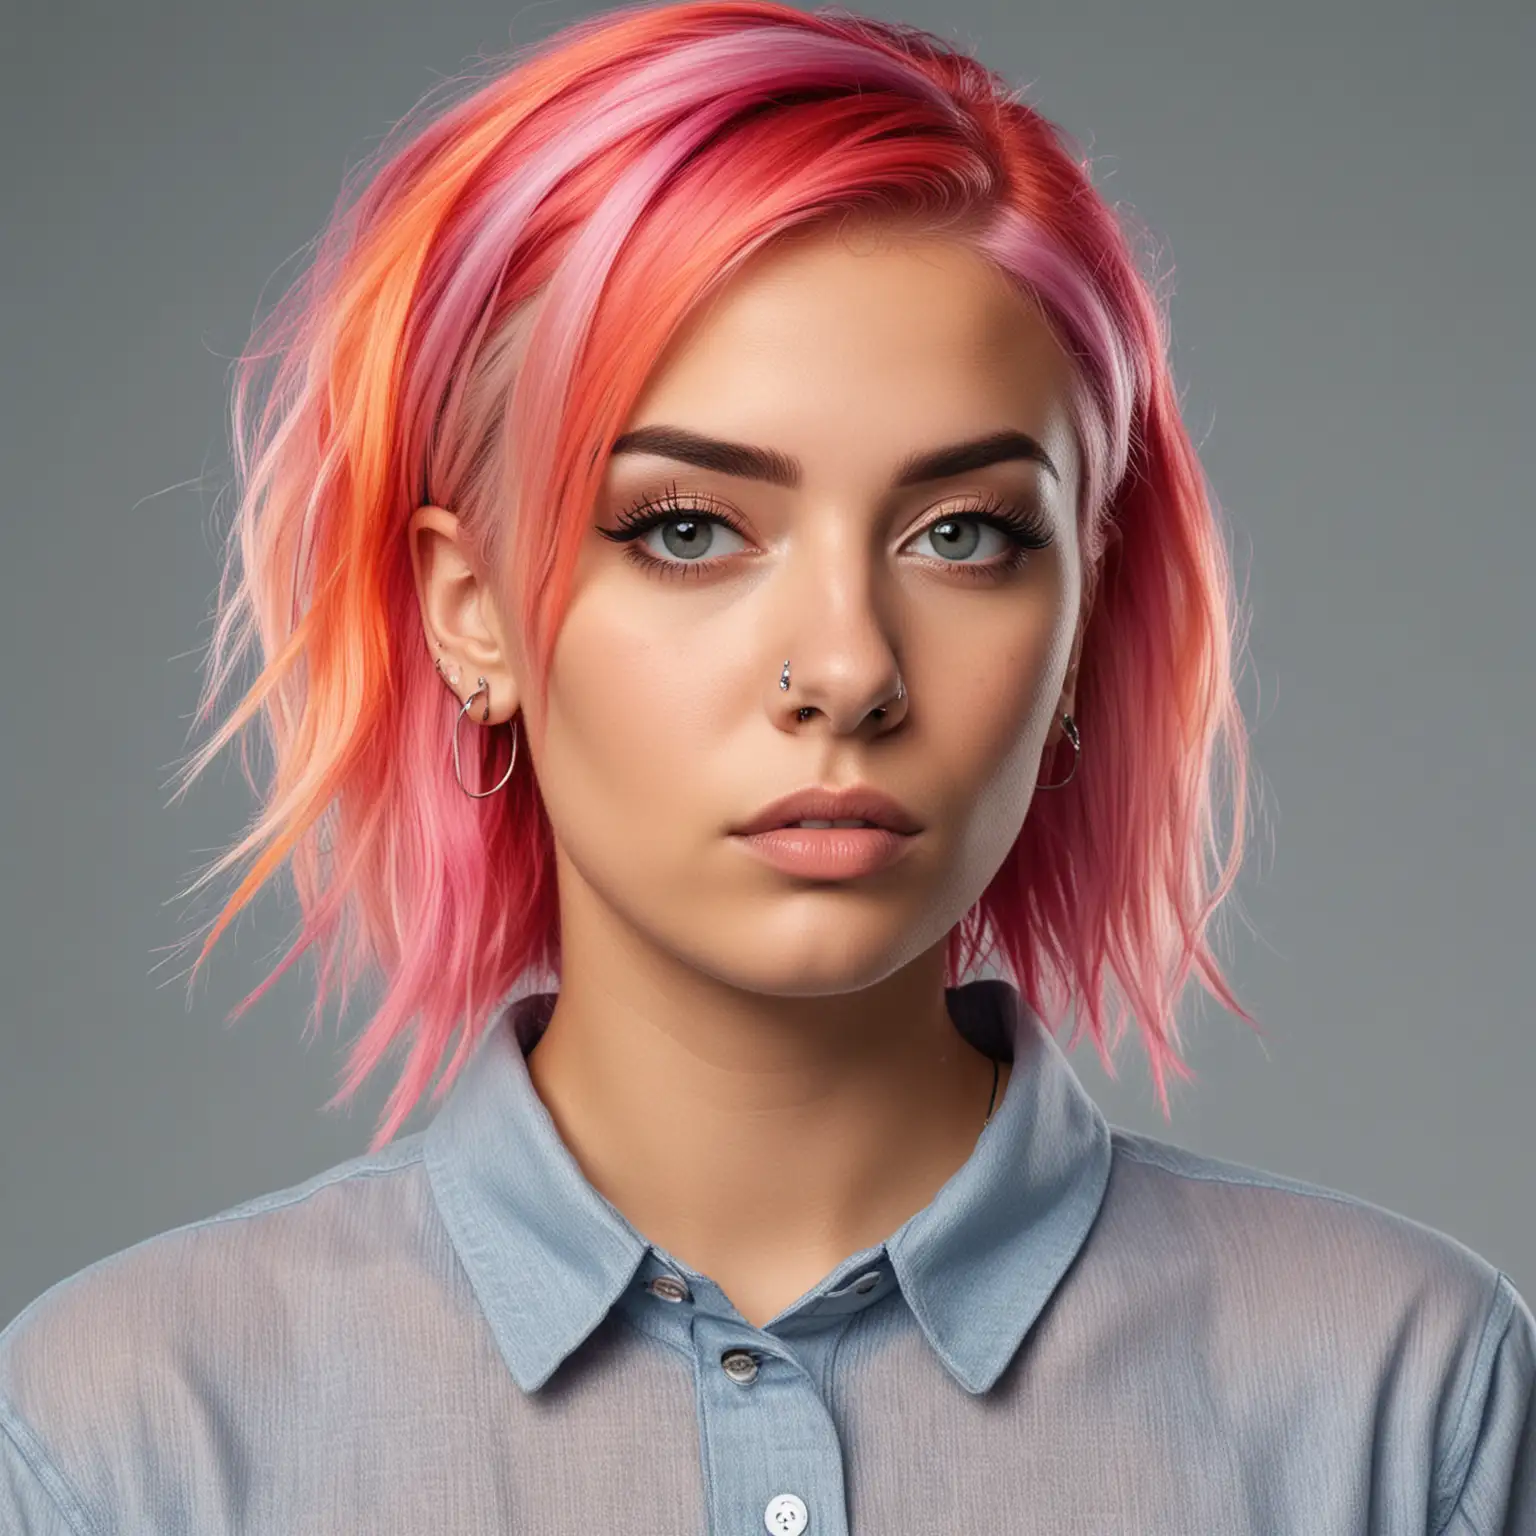 Gen Z Business Person with Colored Hair and Piercings in Studio Lighting